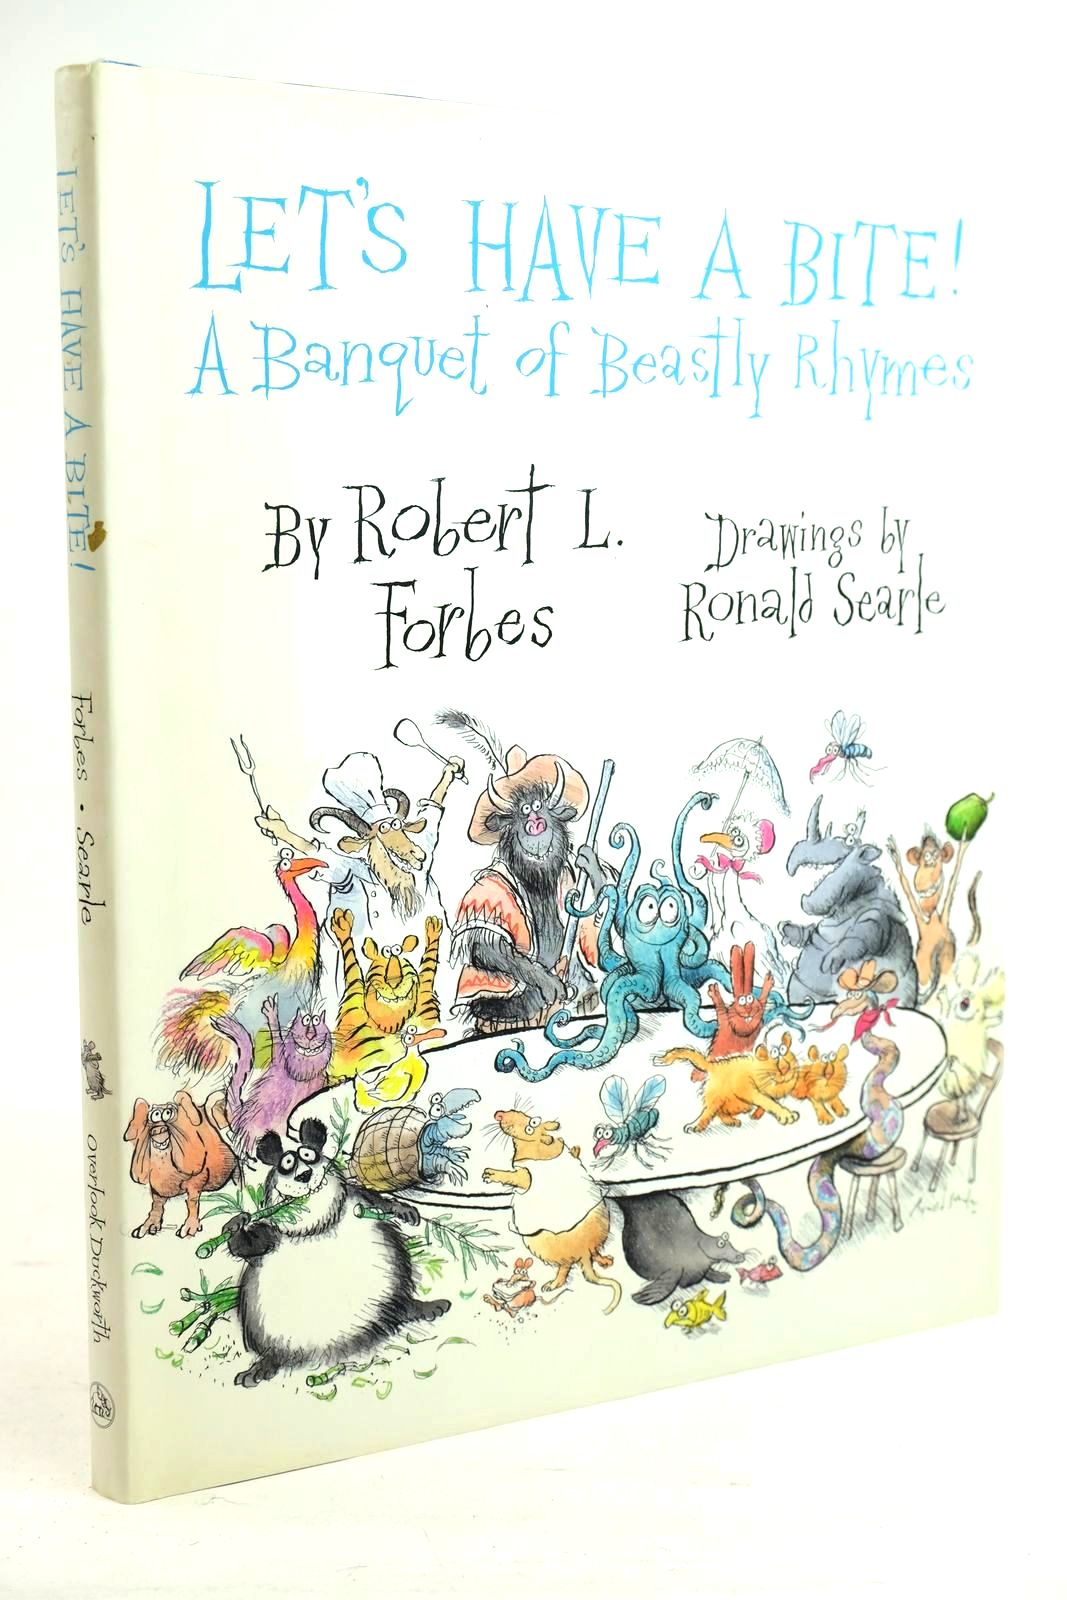 Photo of LET'S HAVE A BITE! A BANQUET OF BEASTLY RHYMES written by Forbes, Robert L. illustrated by Searle, Ronald published by Overlook Duckworth (STOCK CODE: 1320433)  for sale by Stella & Rose's Books